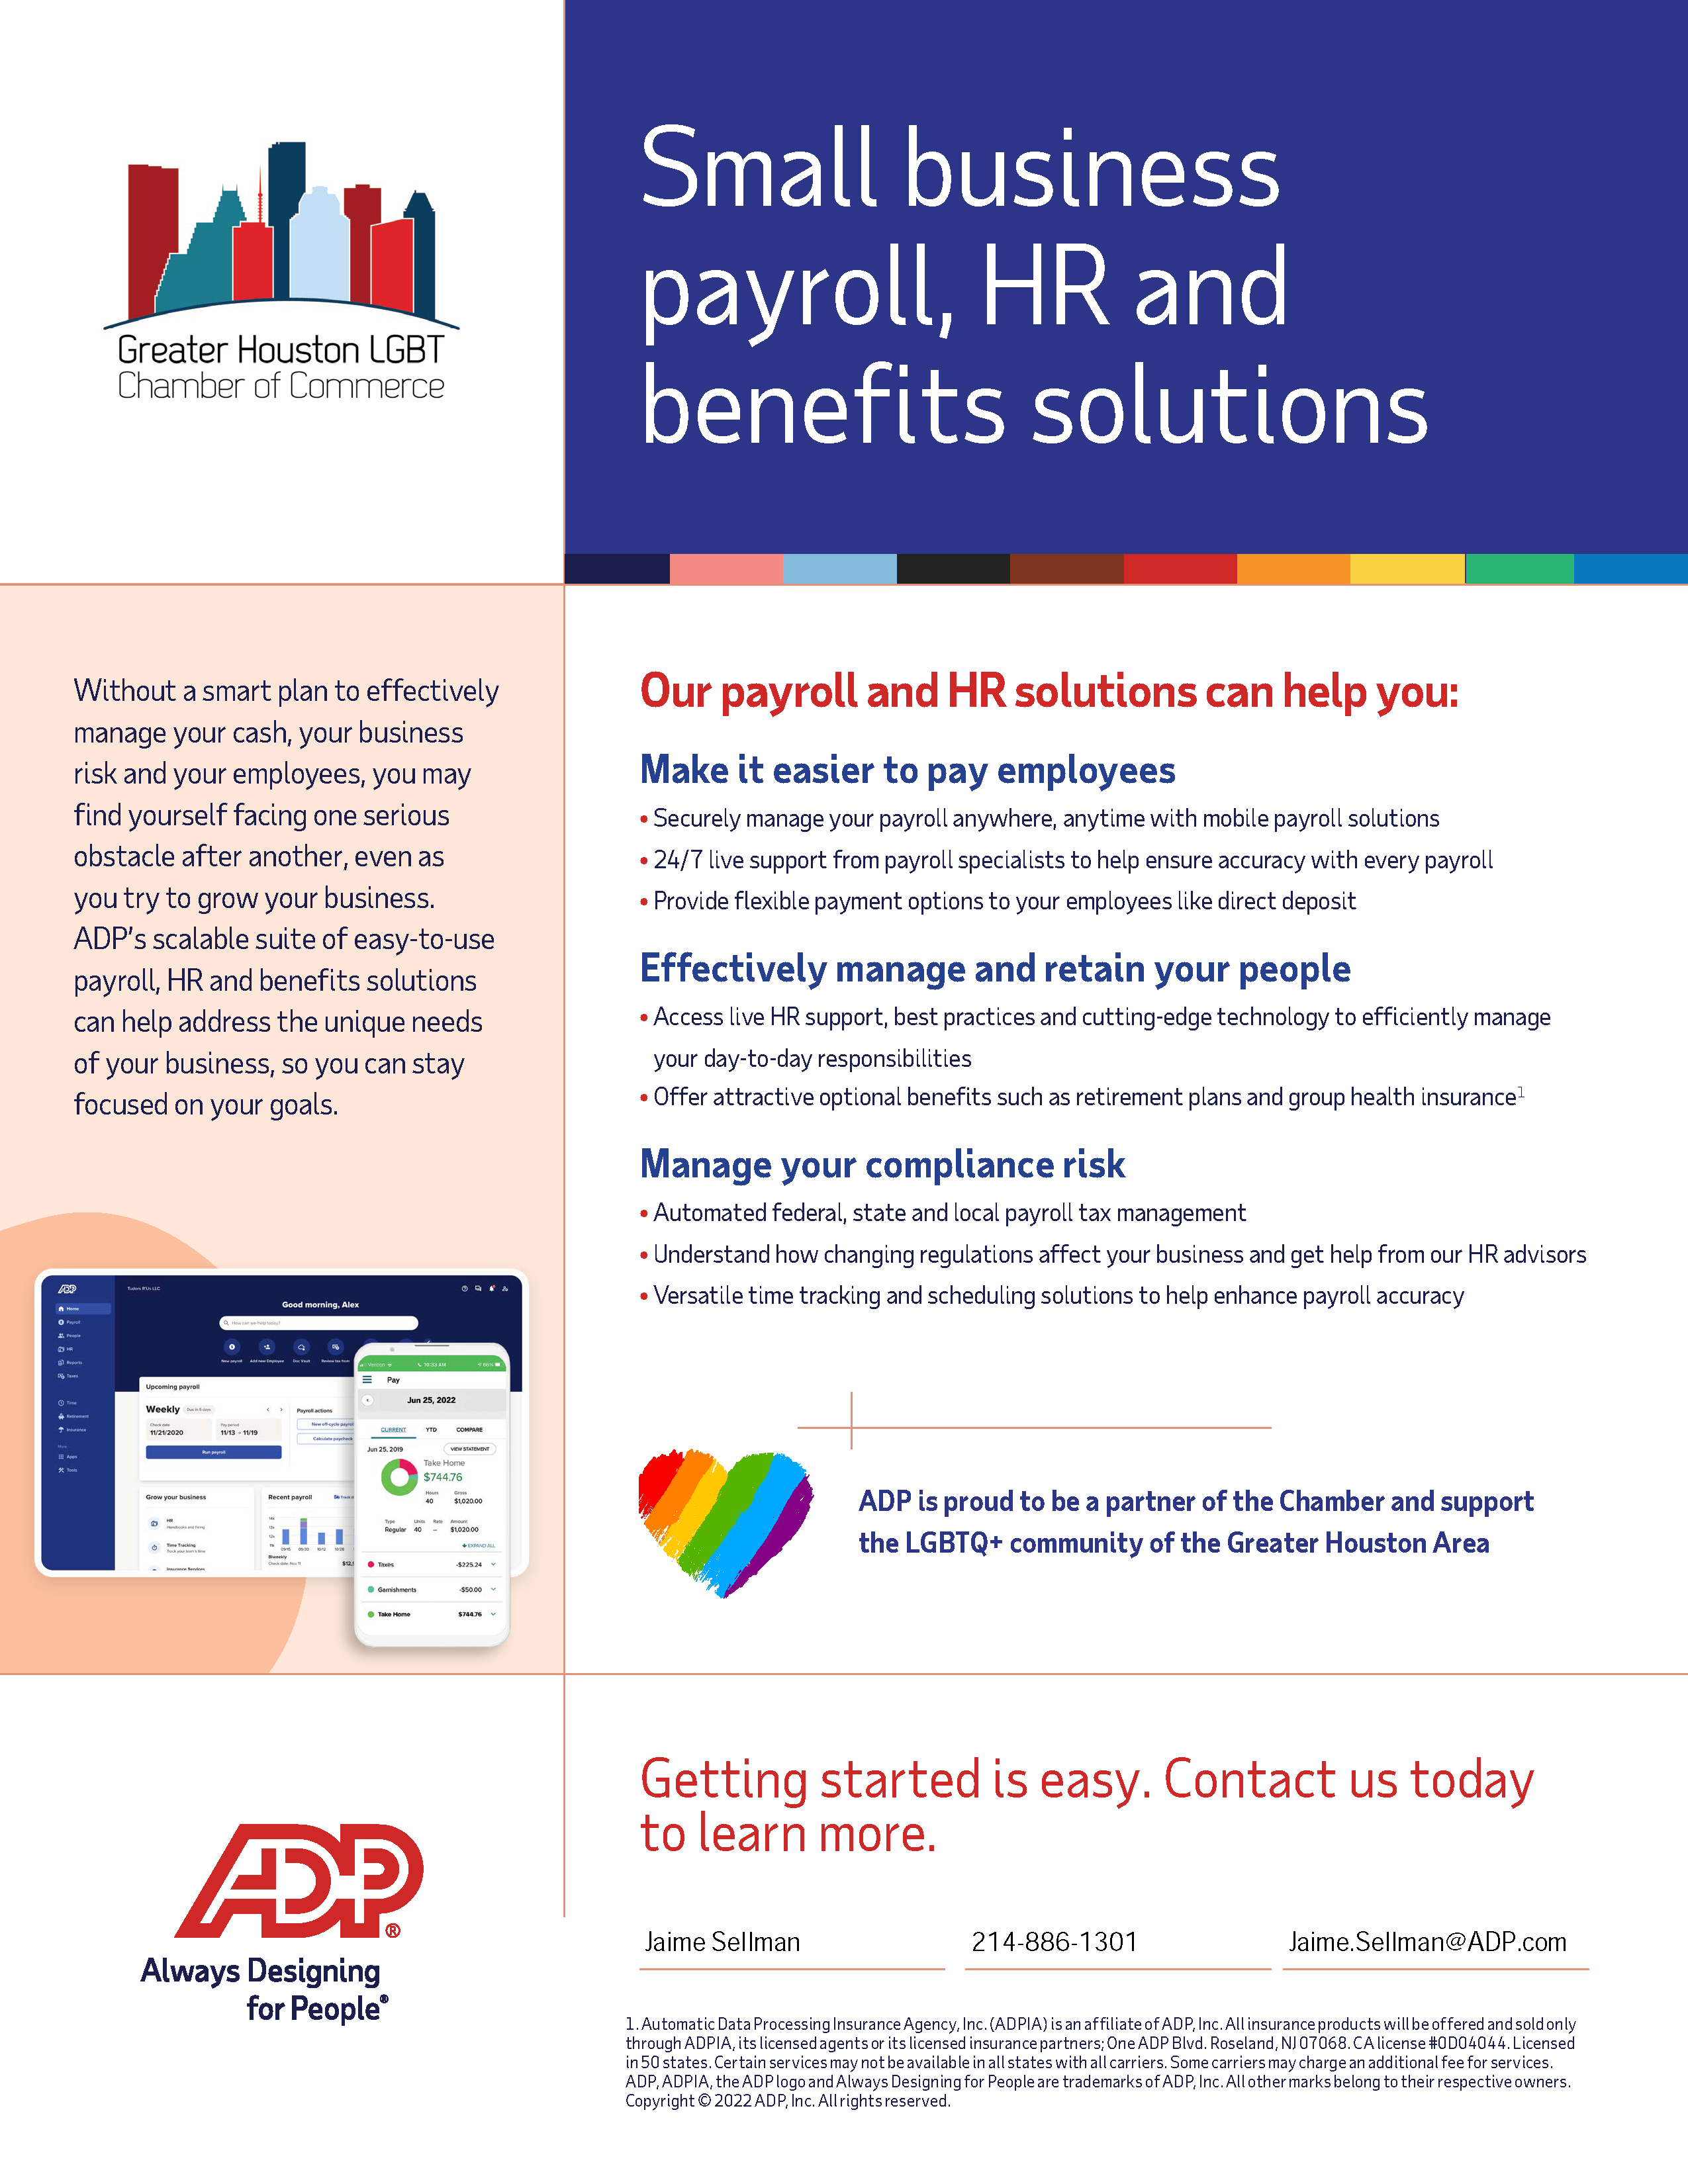 ADP Greater Houston LGBT Chamber Fact Sheet